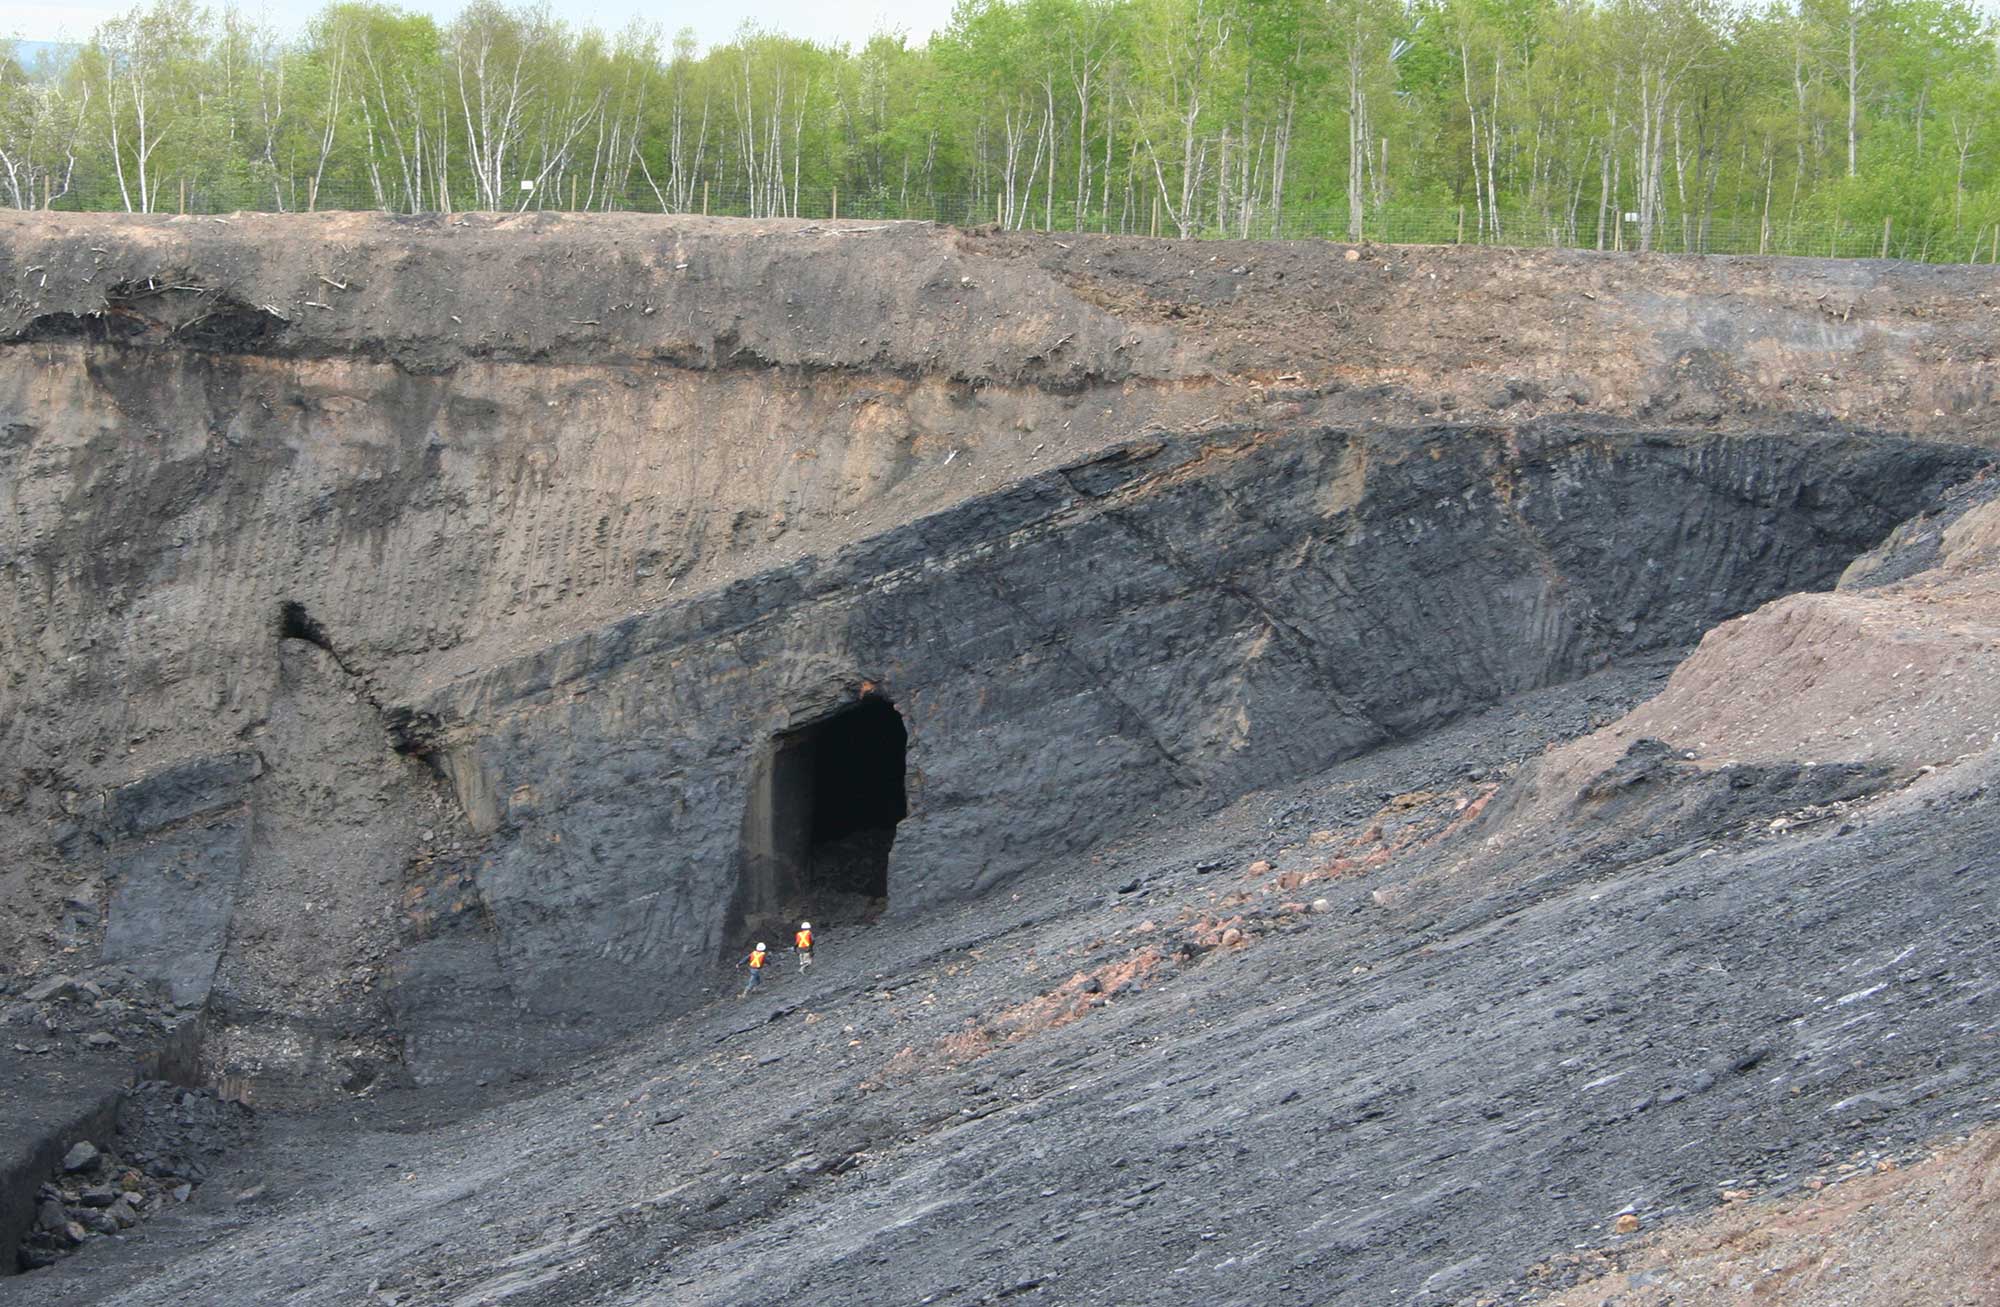 Photograph of a thick coal seam with the entrance to a mine shaft cut into it.